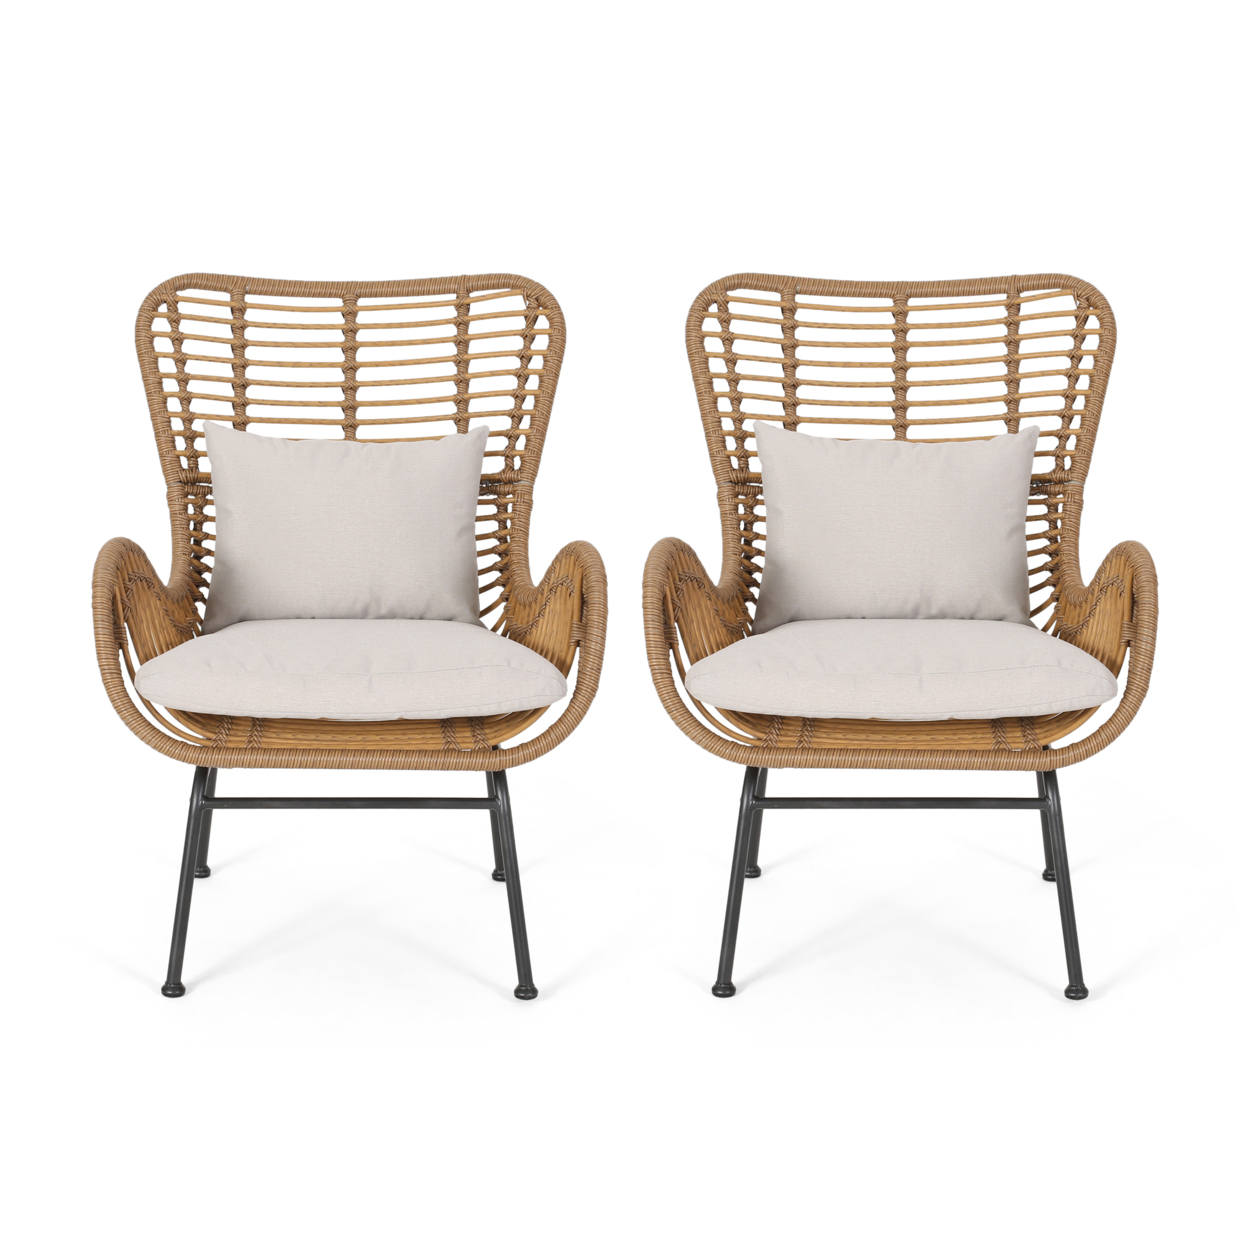 Gloria Indoor Wicker Club Chairs With Cushions (Set Of 2) - Light Brown, Black, Beige